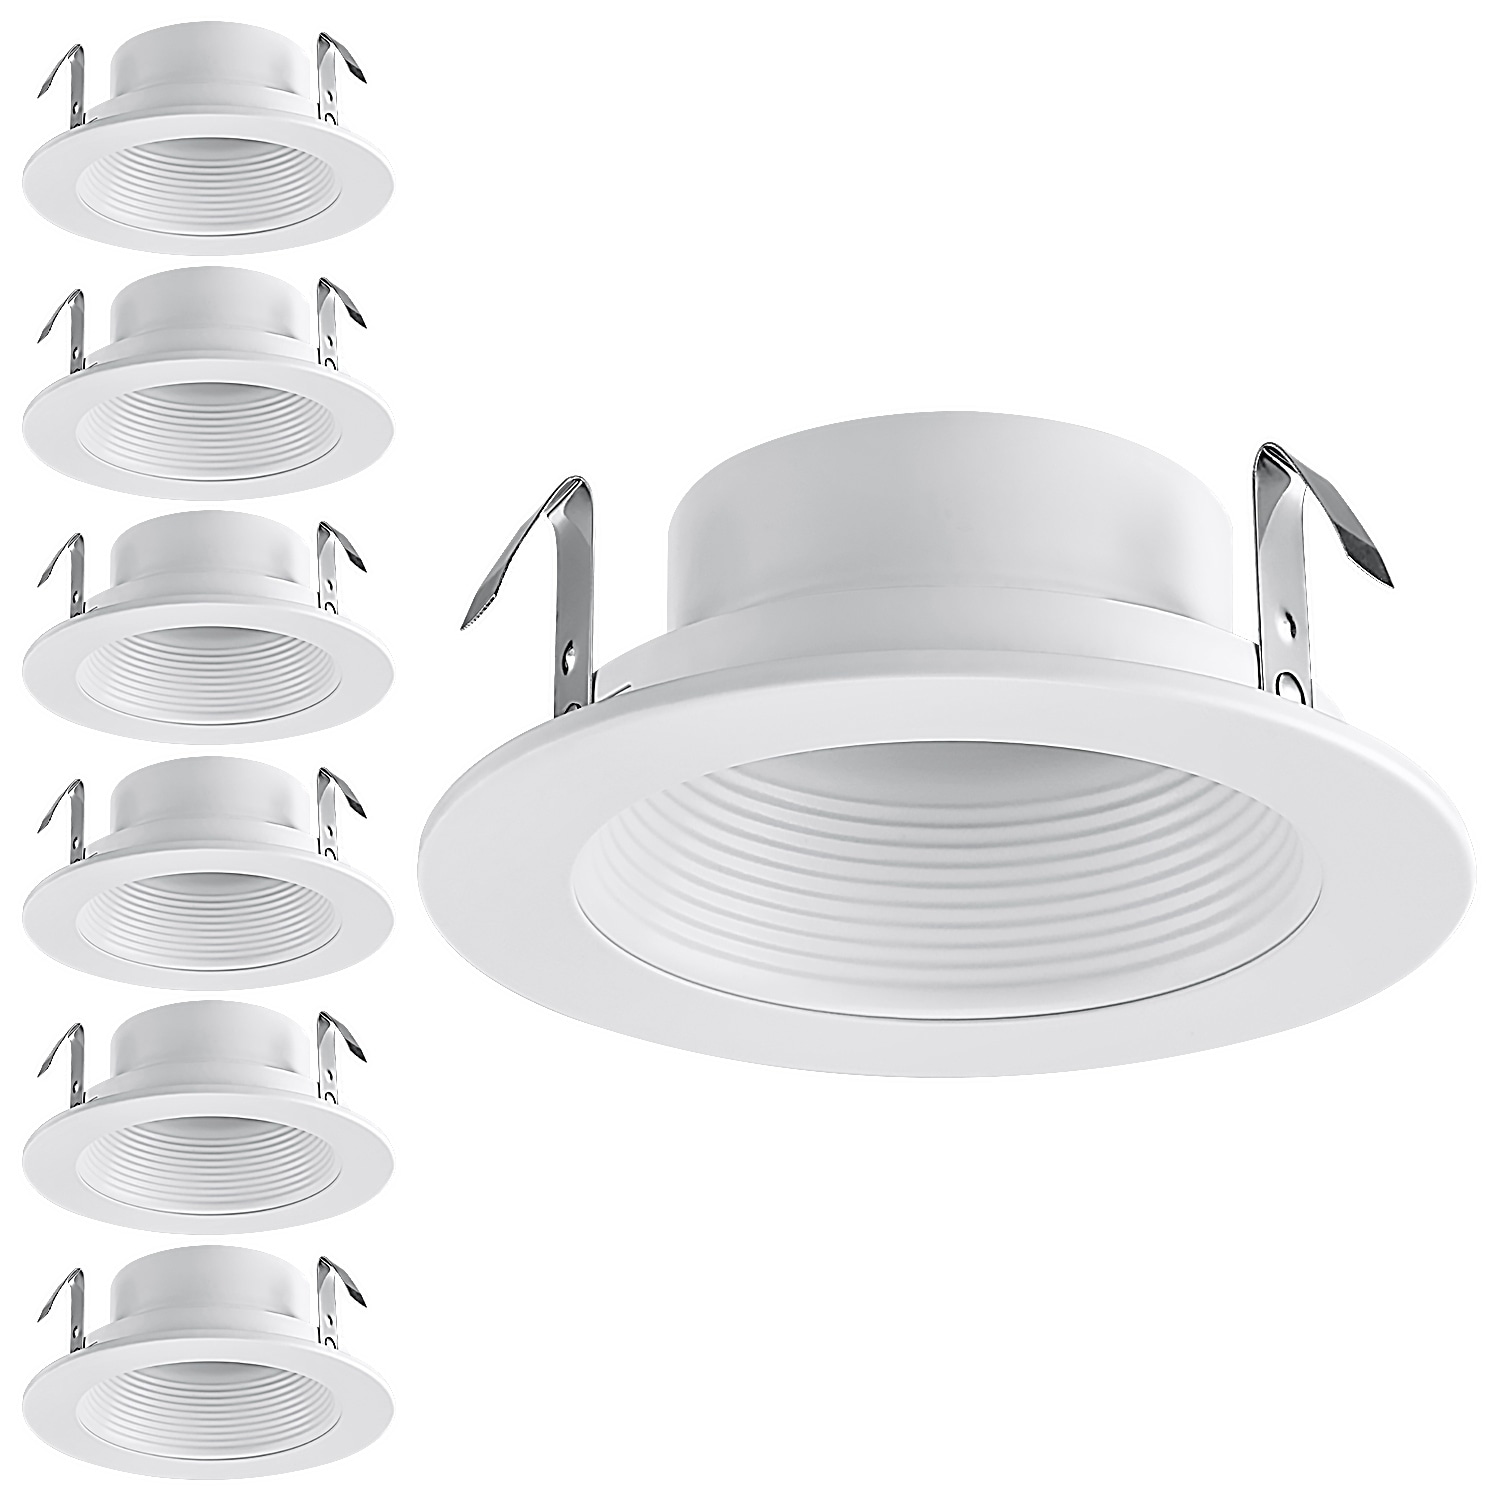 White Fit 6 Inch Halo and Juno Remodel Recessed Housing Step Baffle with Iron Goof Ring TORCHSTAR 12-Pack 6 Inch Metal Recessed Can Light Trim